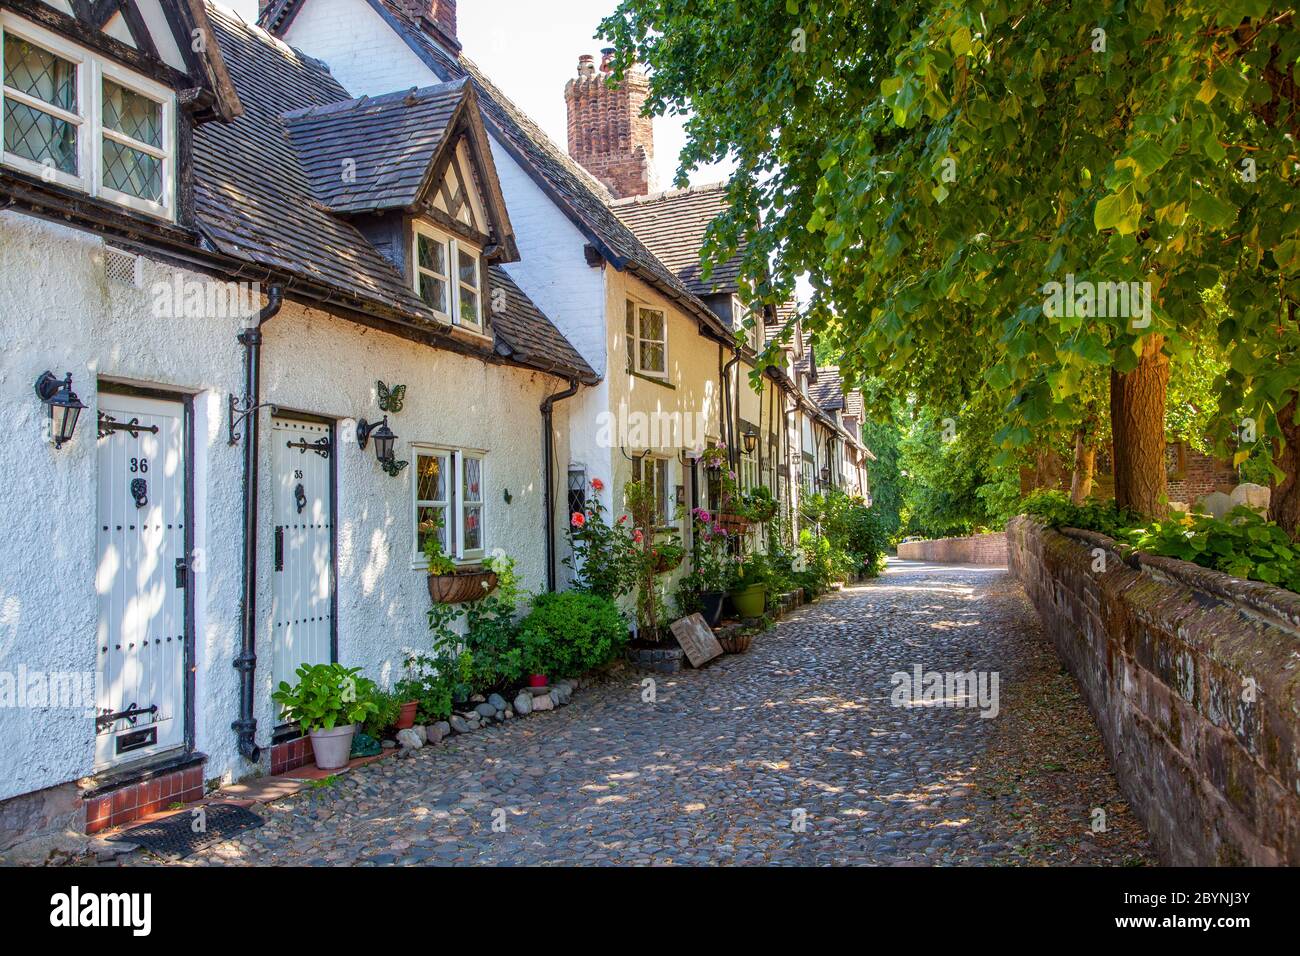 View of old country cottages along an old cobbled lane in the Cheshire rural country  village of Great Budworth Cheshire England UK Stock Photo